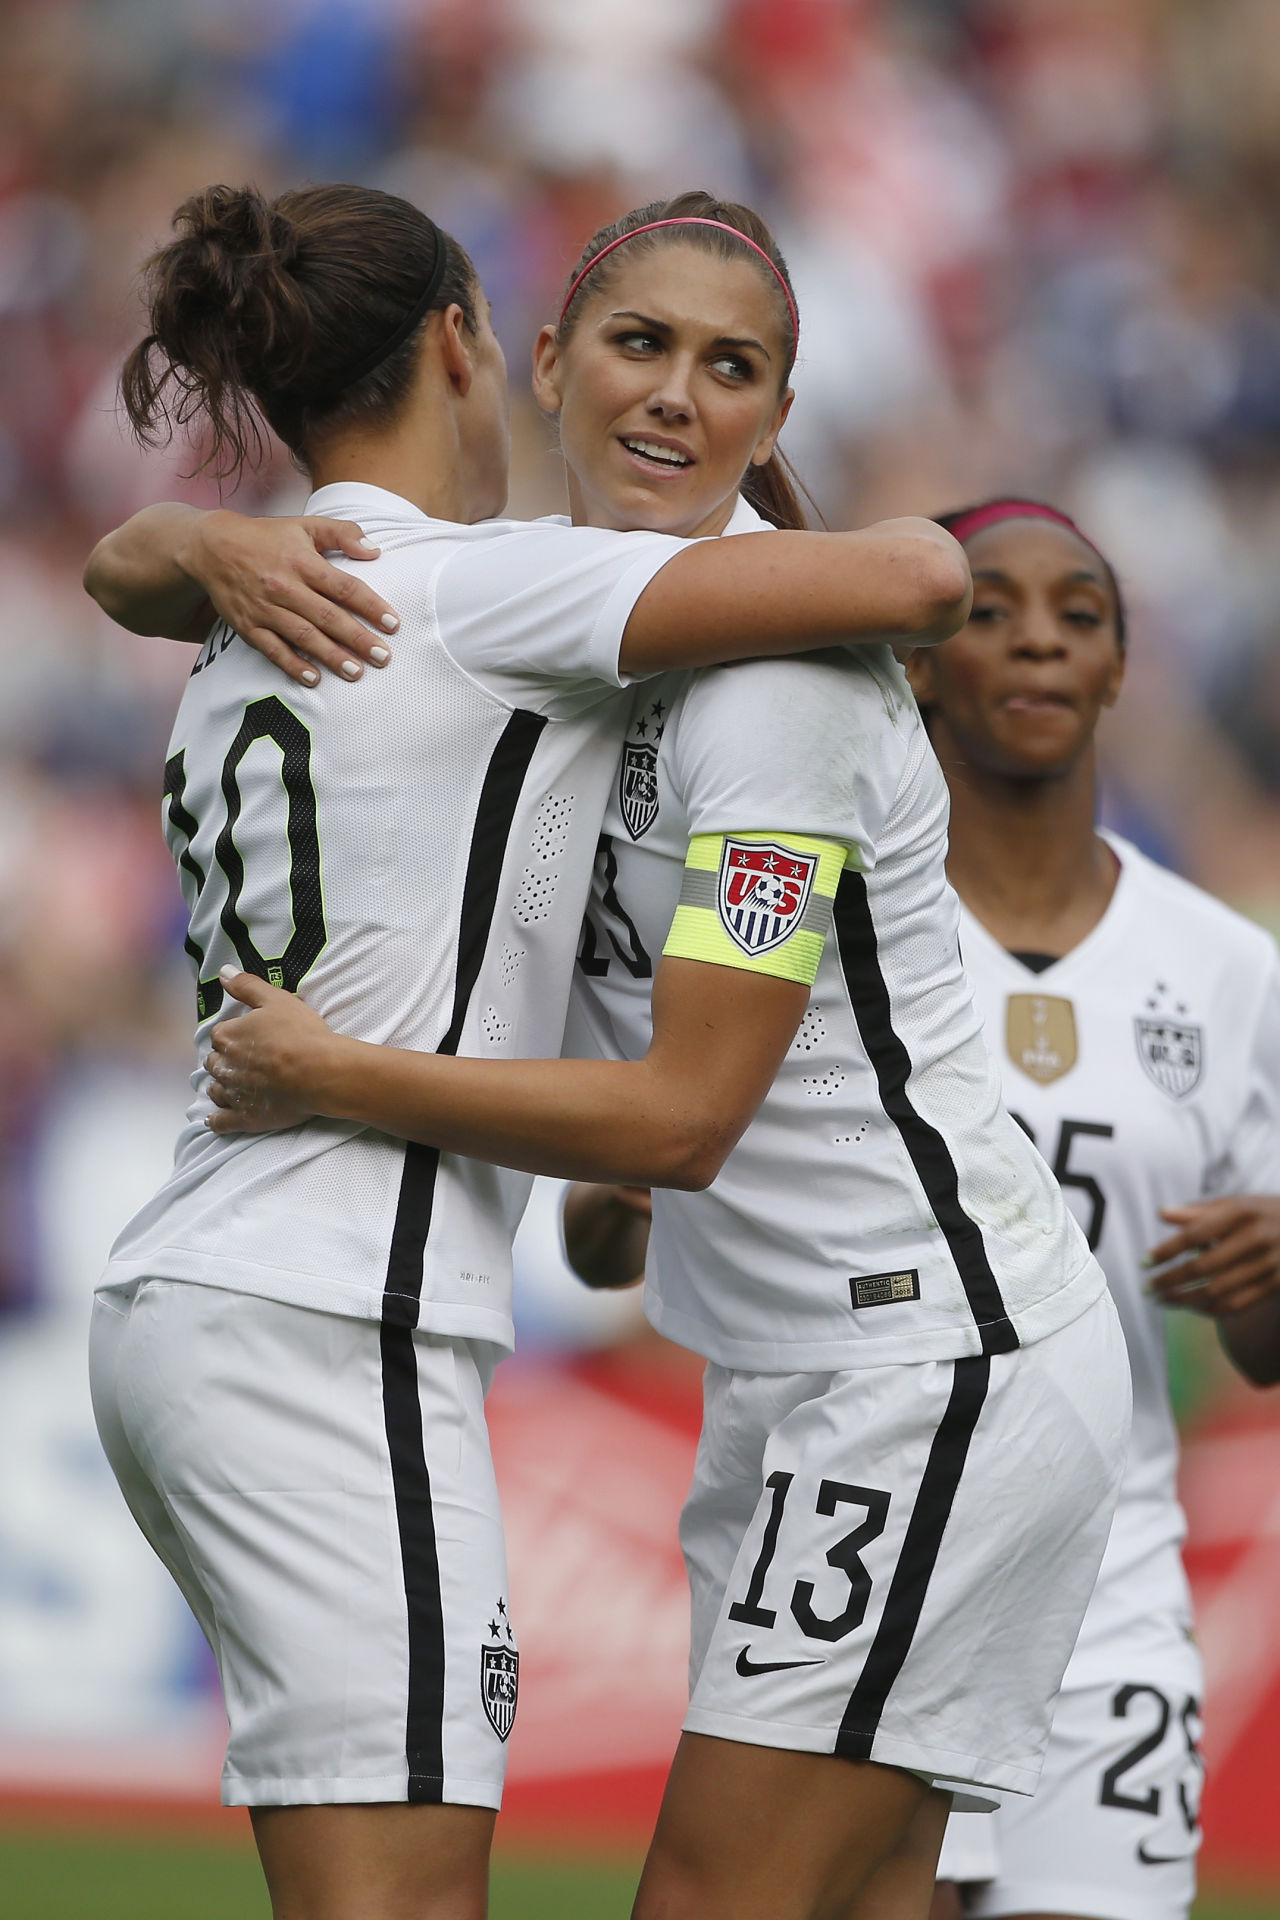 The US Women's team have fought to get the same treatment as the men's national team. (Todd Warshaw/Getty Images)